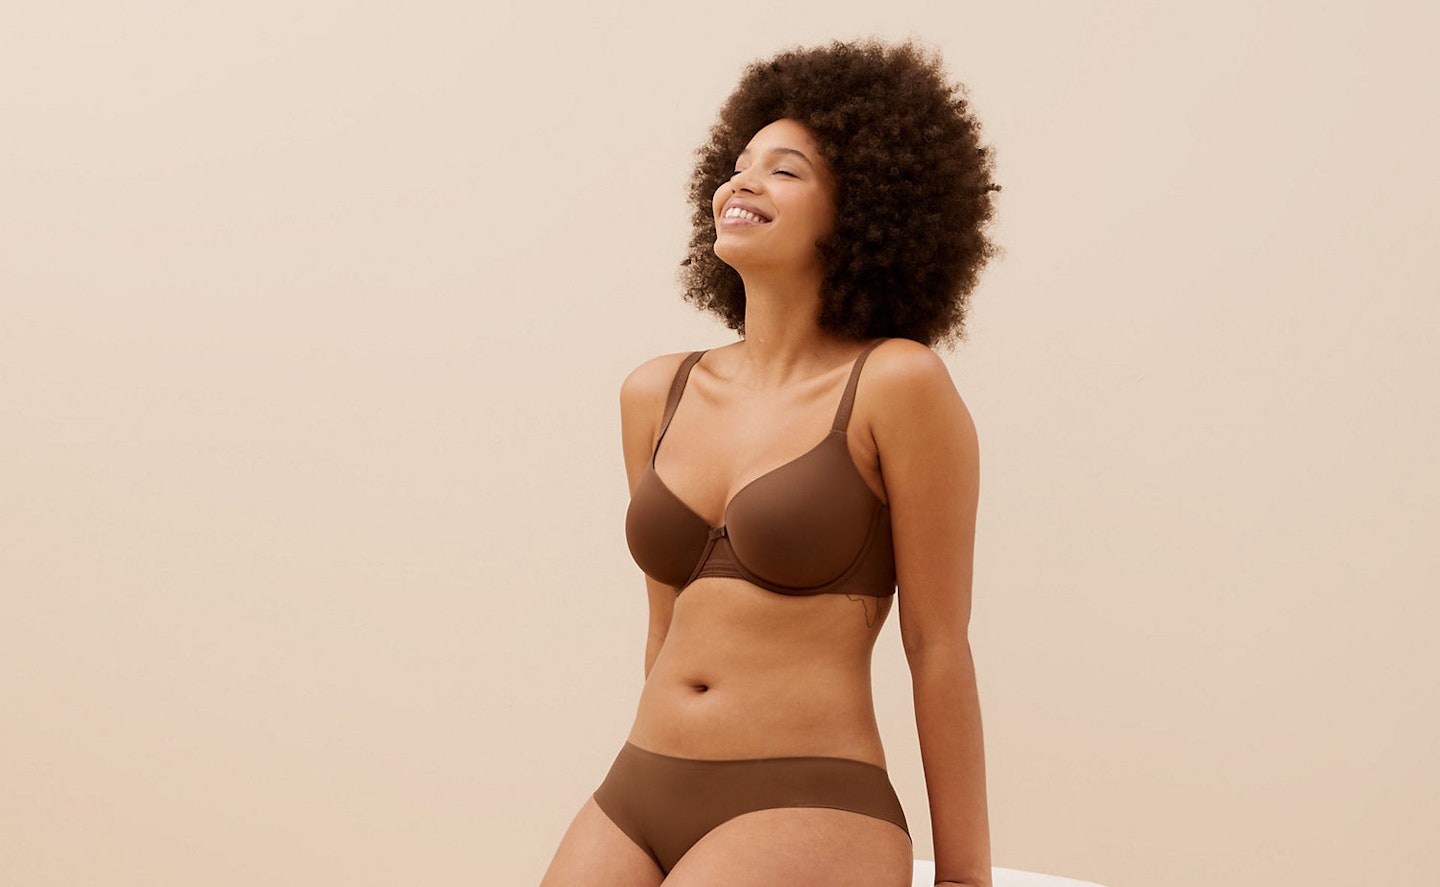 Introducing Nubian Skin: Nude Lingerie and Hosiery for Women of Color